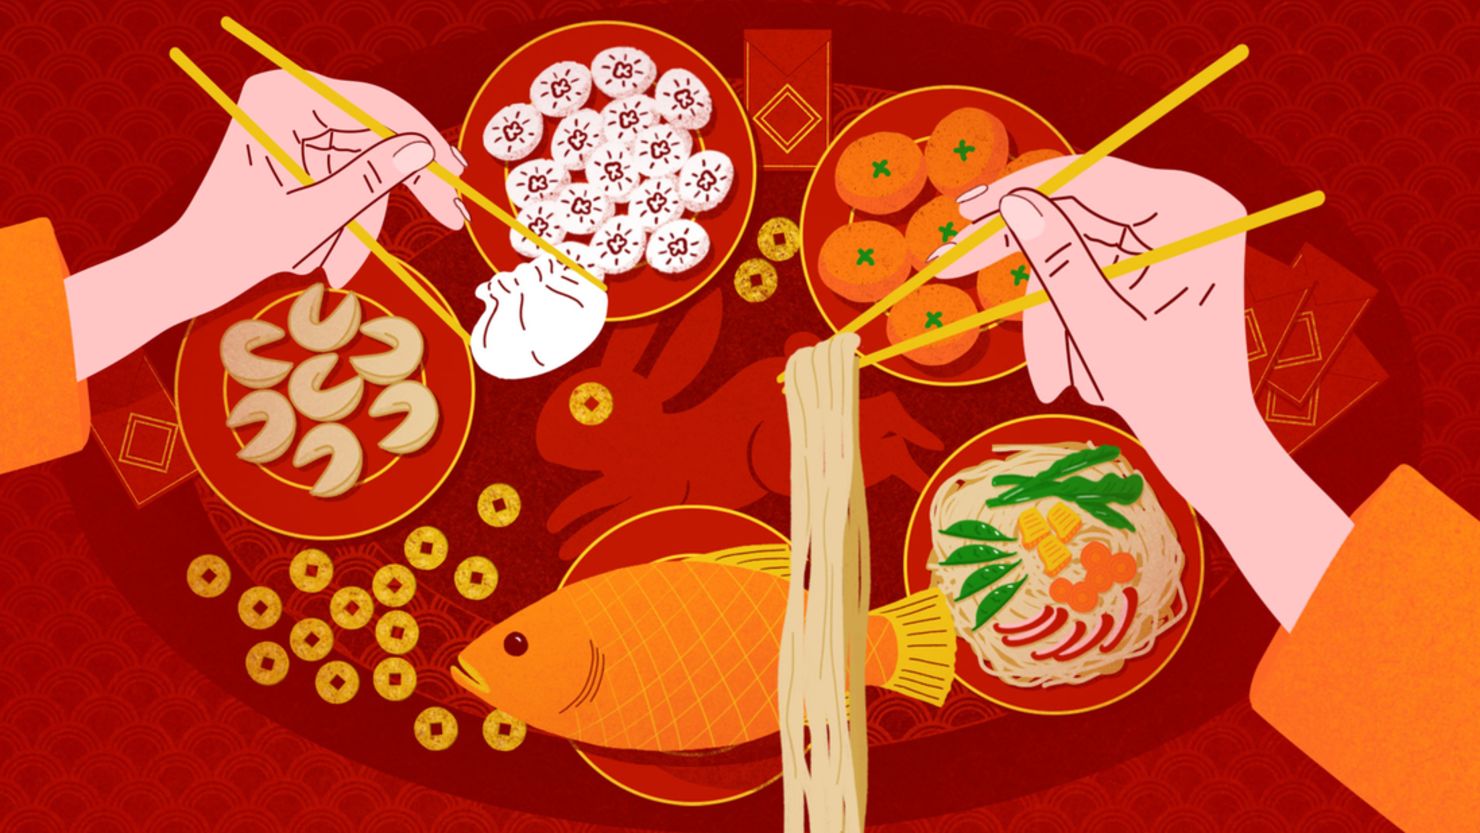 The Year of the Rabbit: An illustrated guide to Lunar New Year